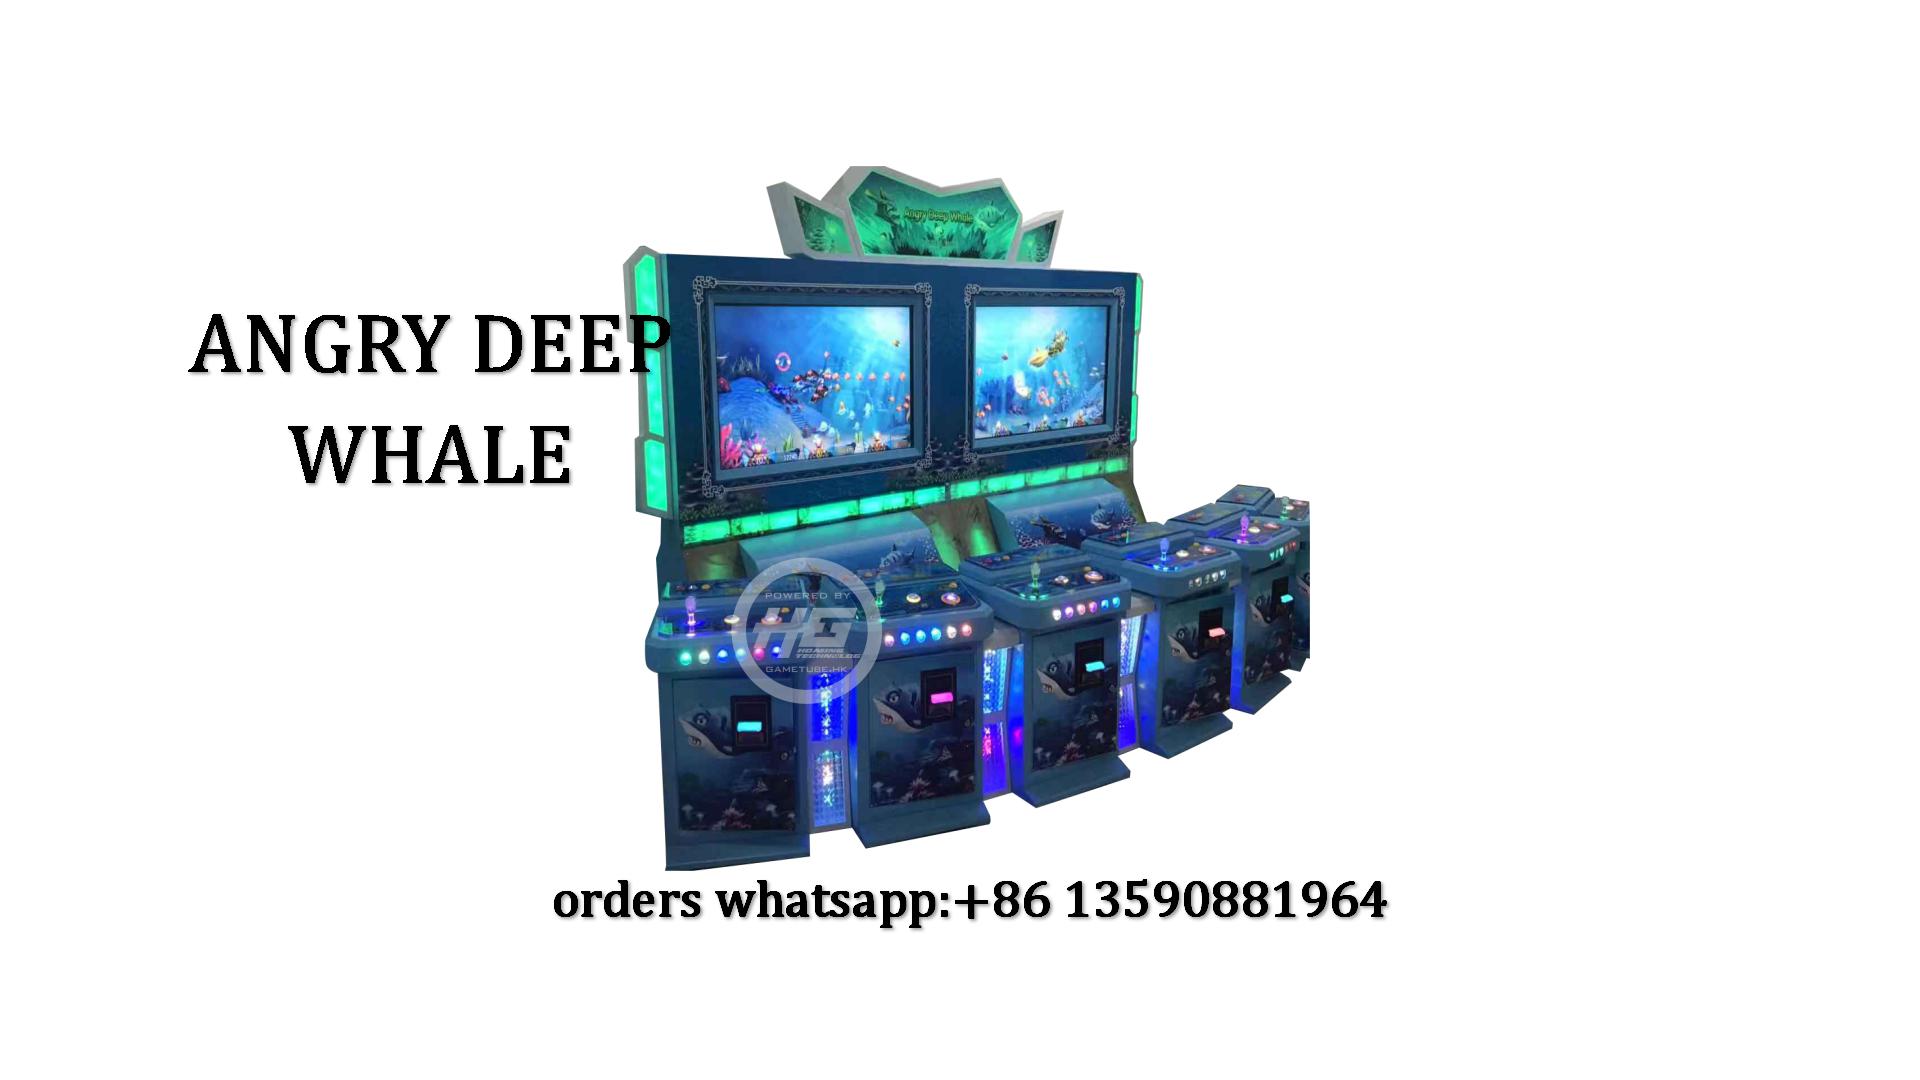 Taiwan Original Angry Deep Whale Fishing Game,6 Players Upright Fish Game Machine For Sale